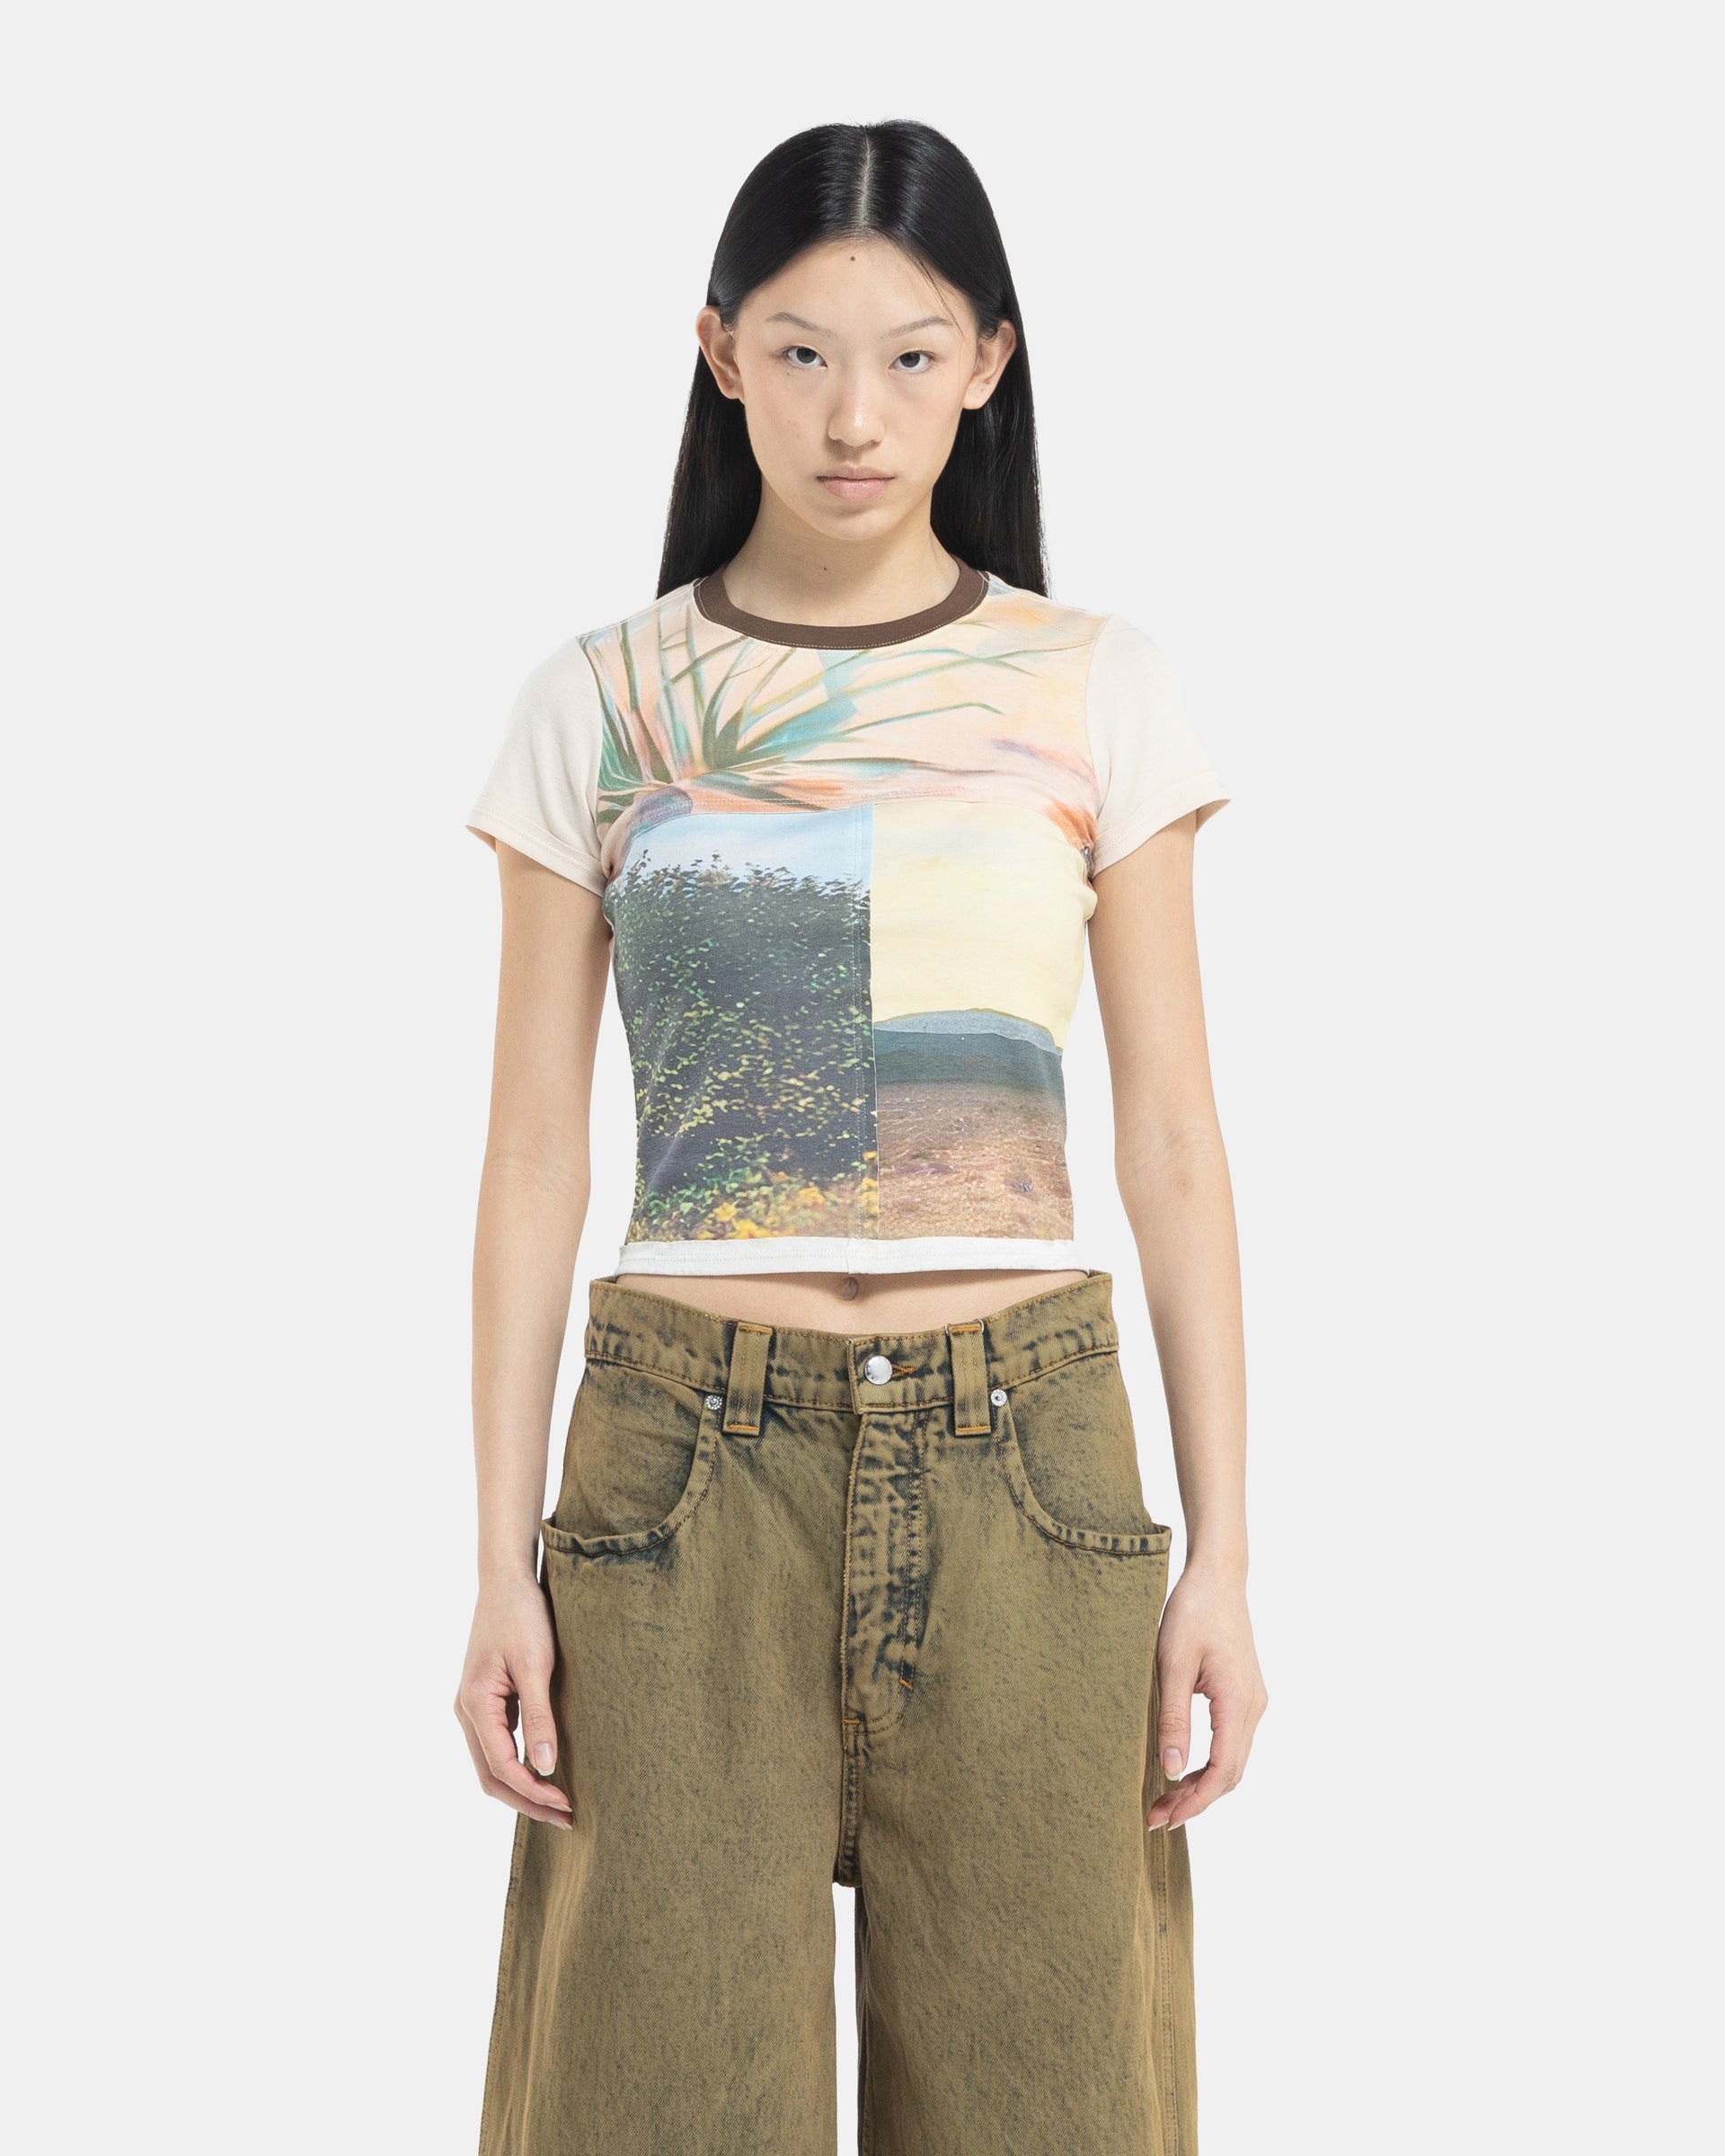 Female model wearing a Eckhaus Latta Lapped Baby Tee with a collage print design